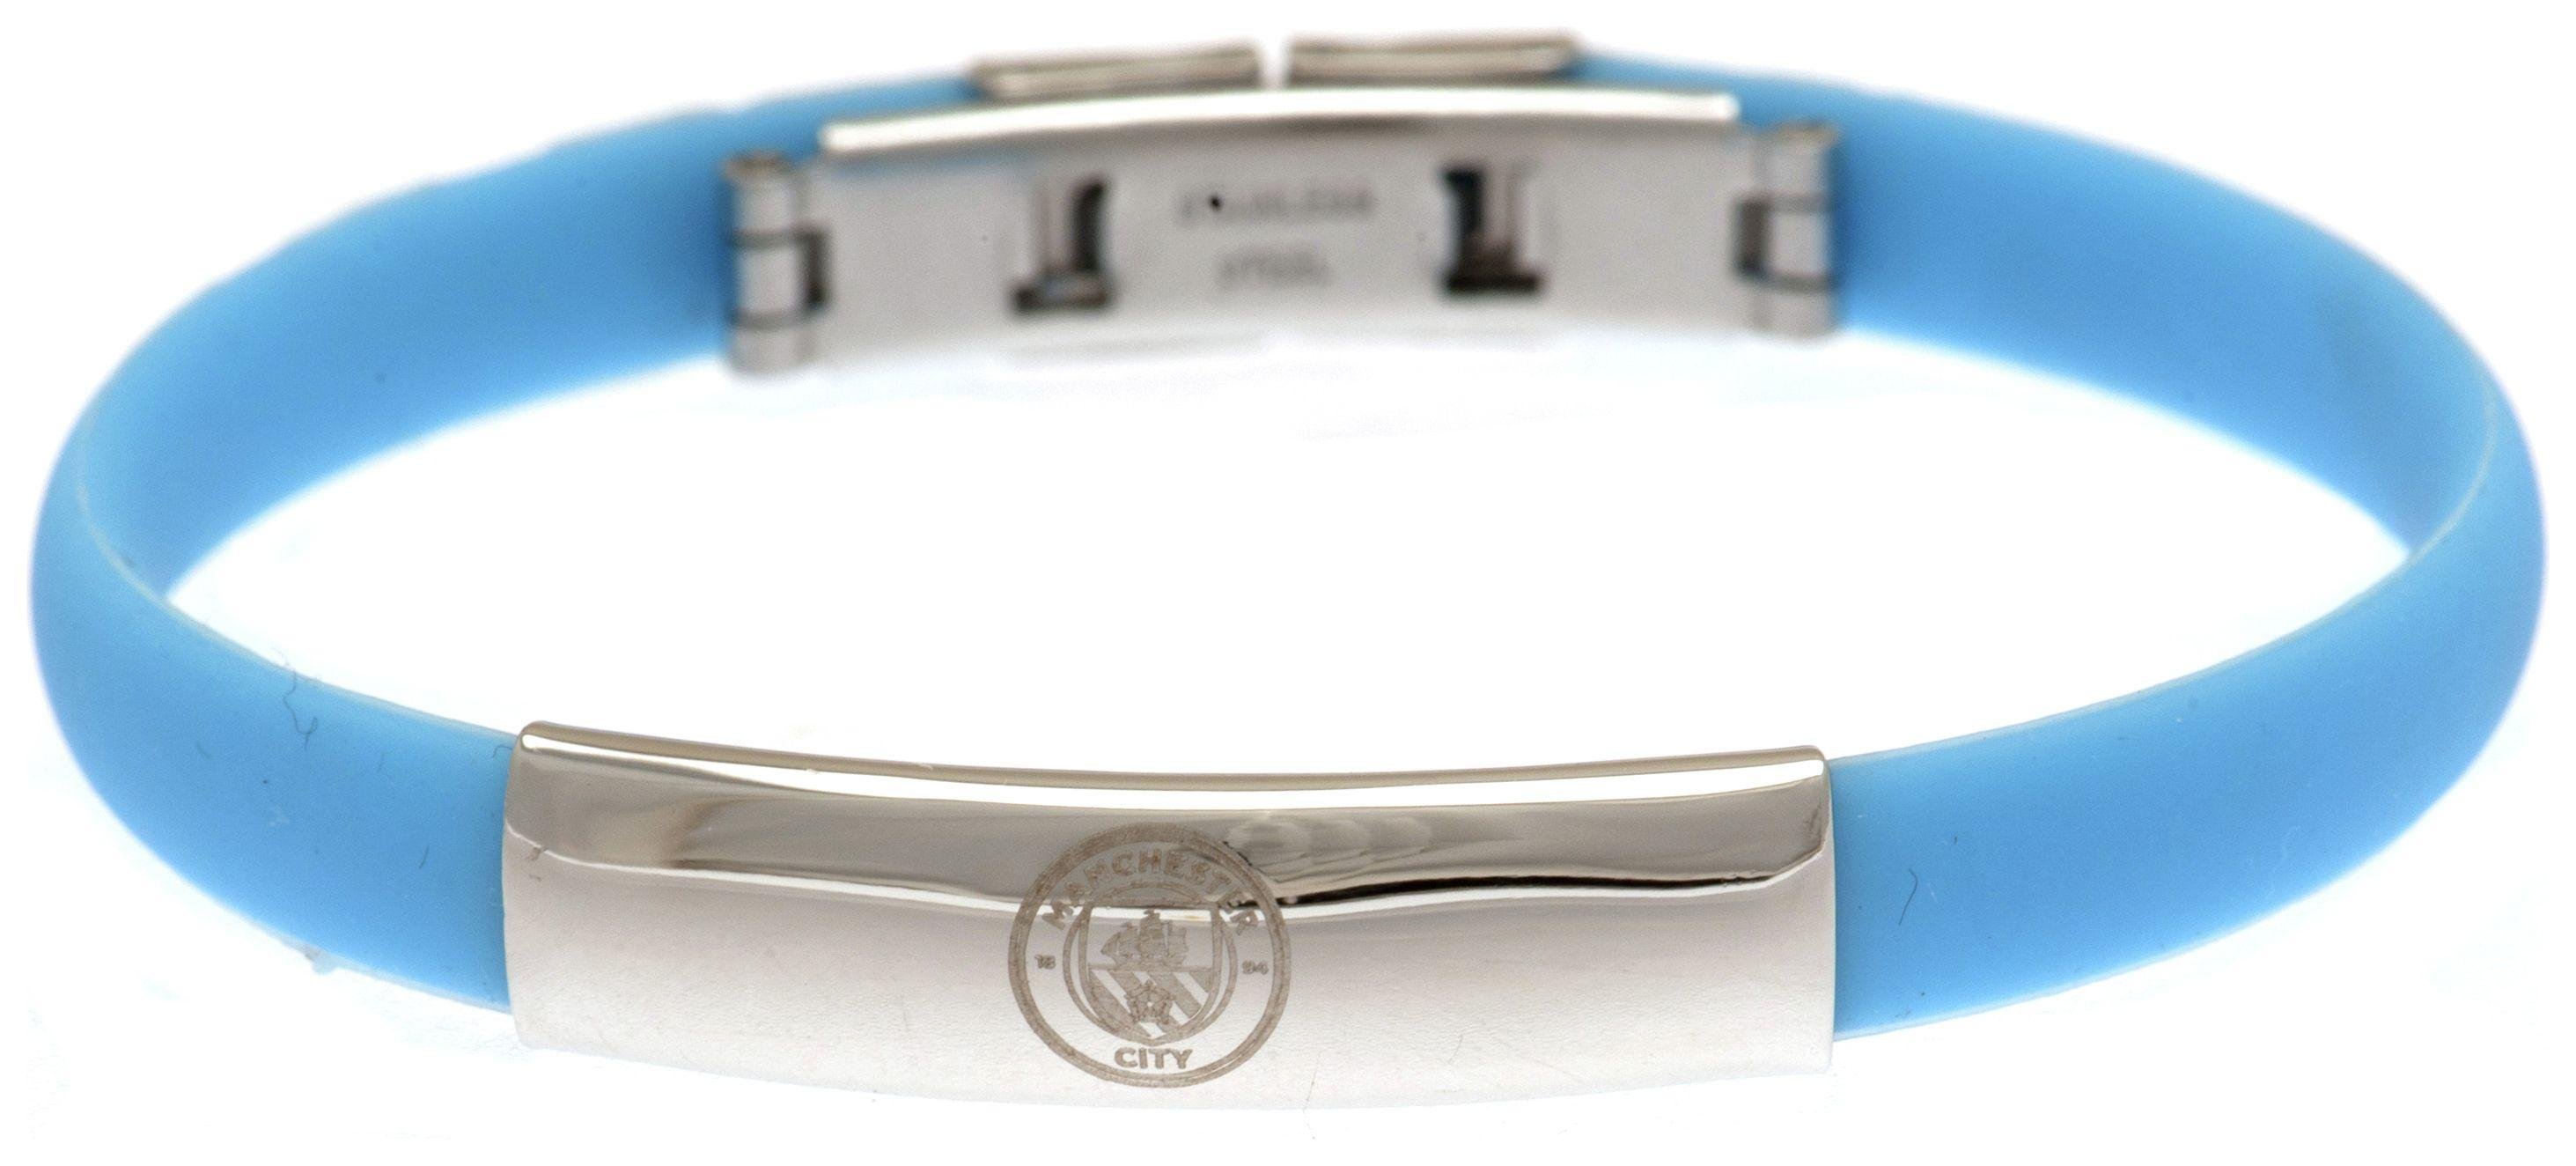 Stainless Steel and Rubber Man City Bracelet